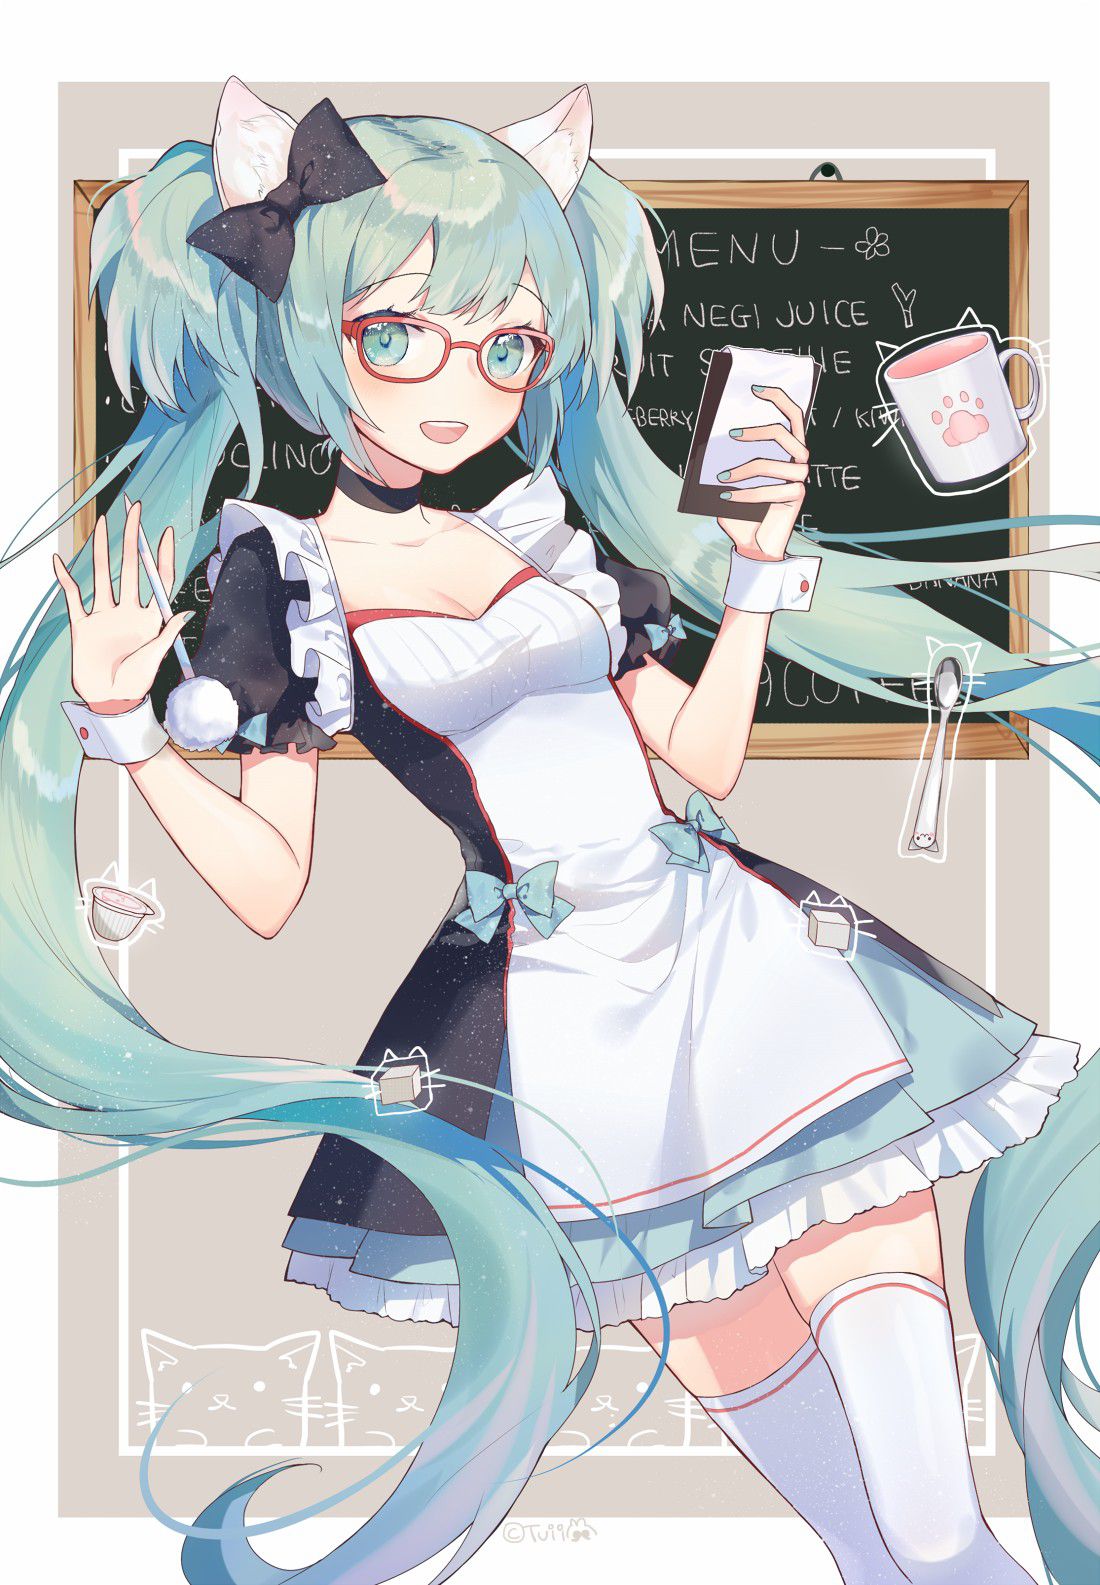 [2nd] Cute Glasses Daughter Secondary Image Part 45 [Glasses Daughter Non-Erotic] 14